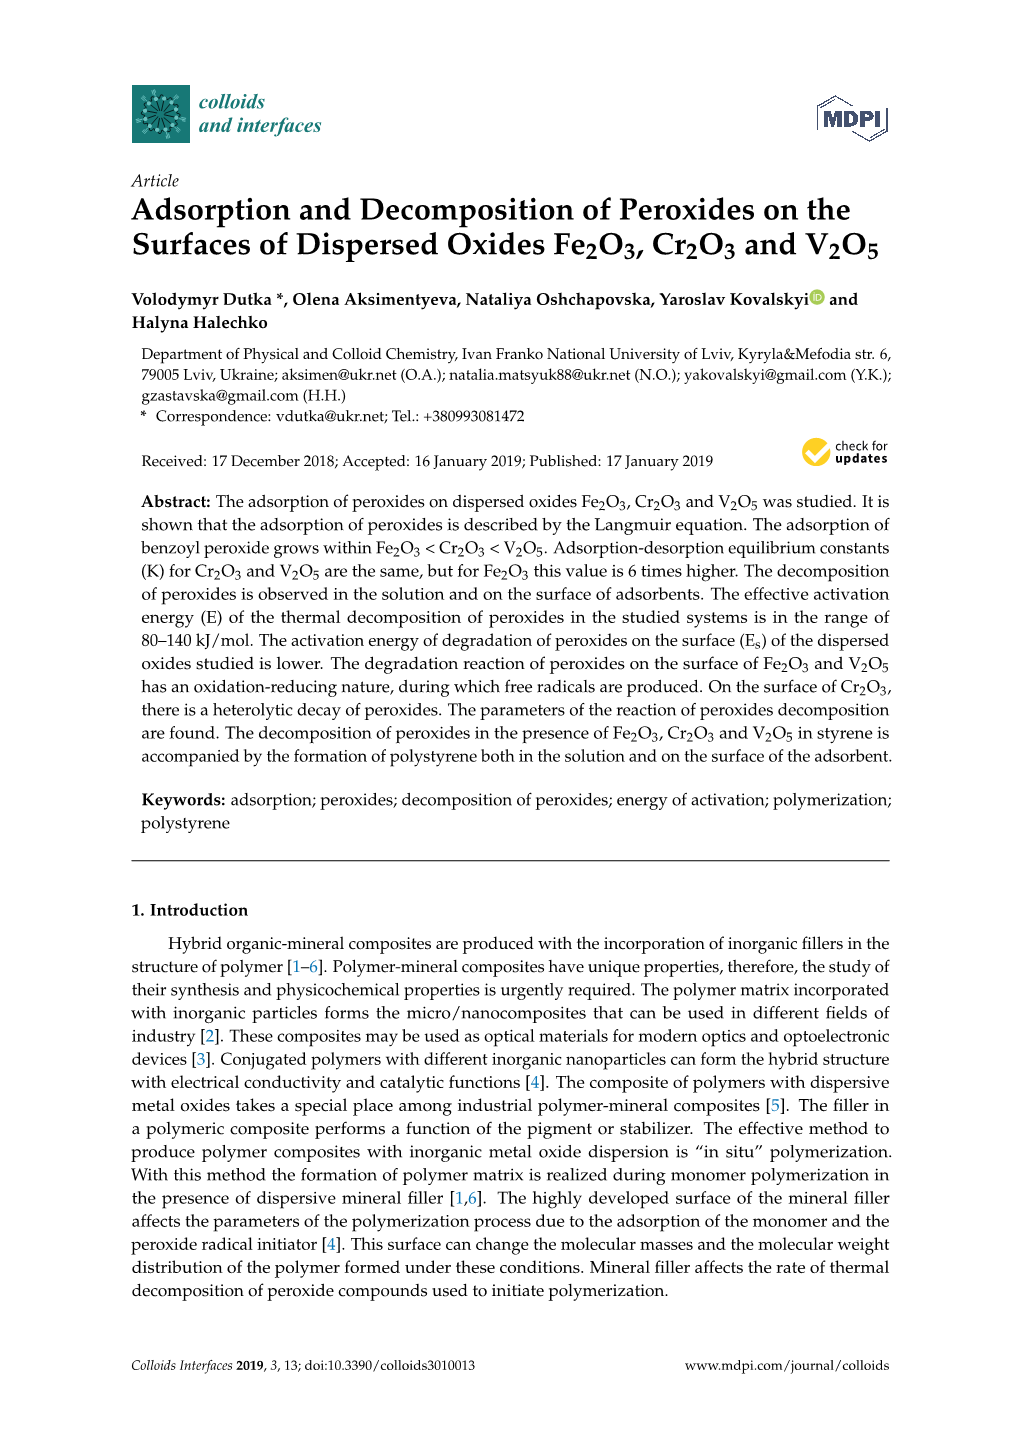 Adsorption and Decomposition of Peroxides on the Surfaces of Dispersed Oxides Fe2o3, Cr2o3 and V2O5